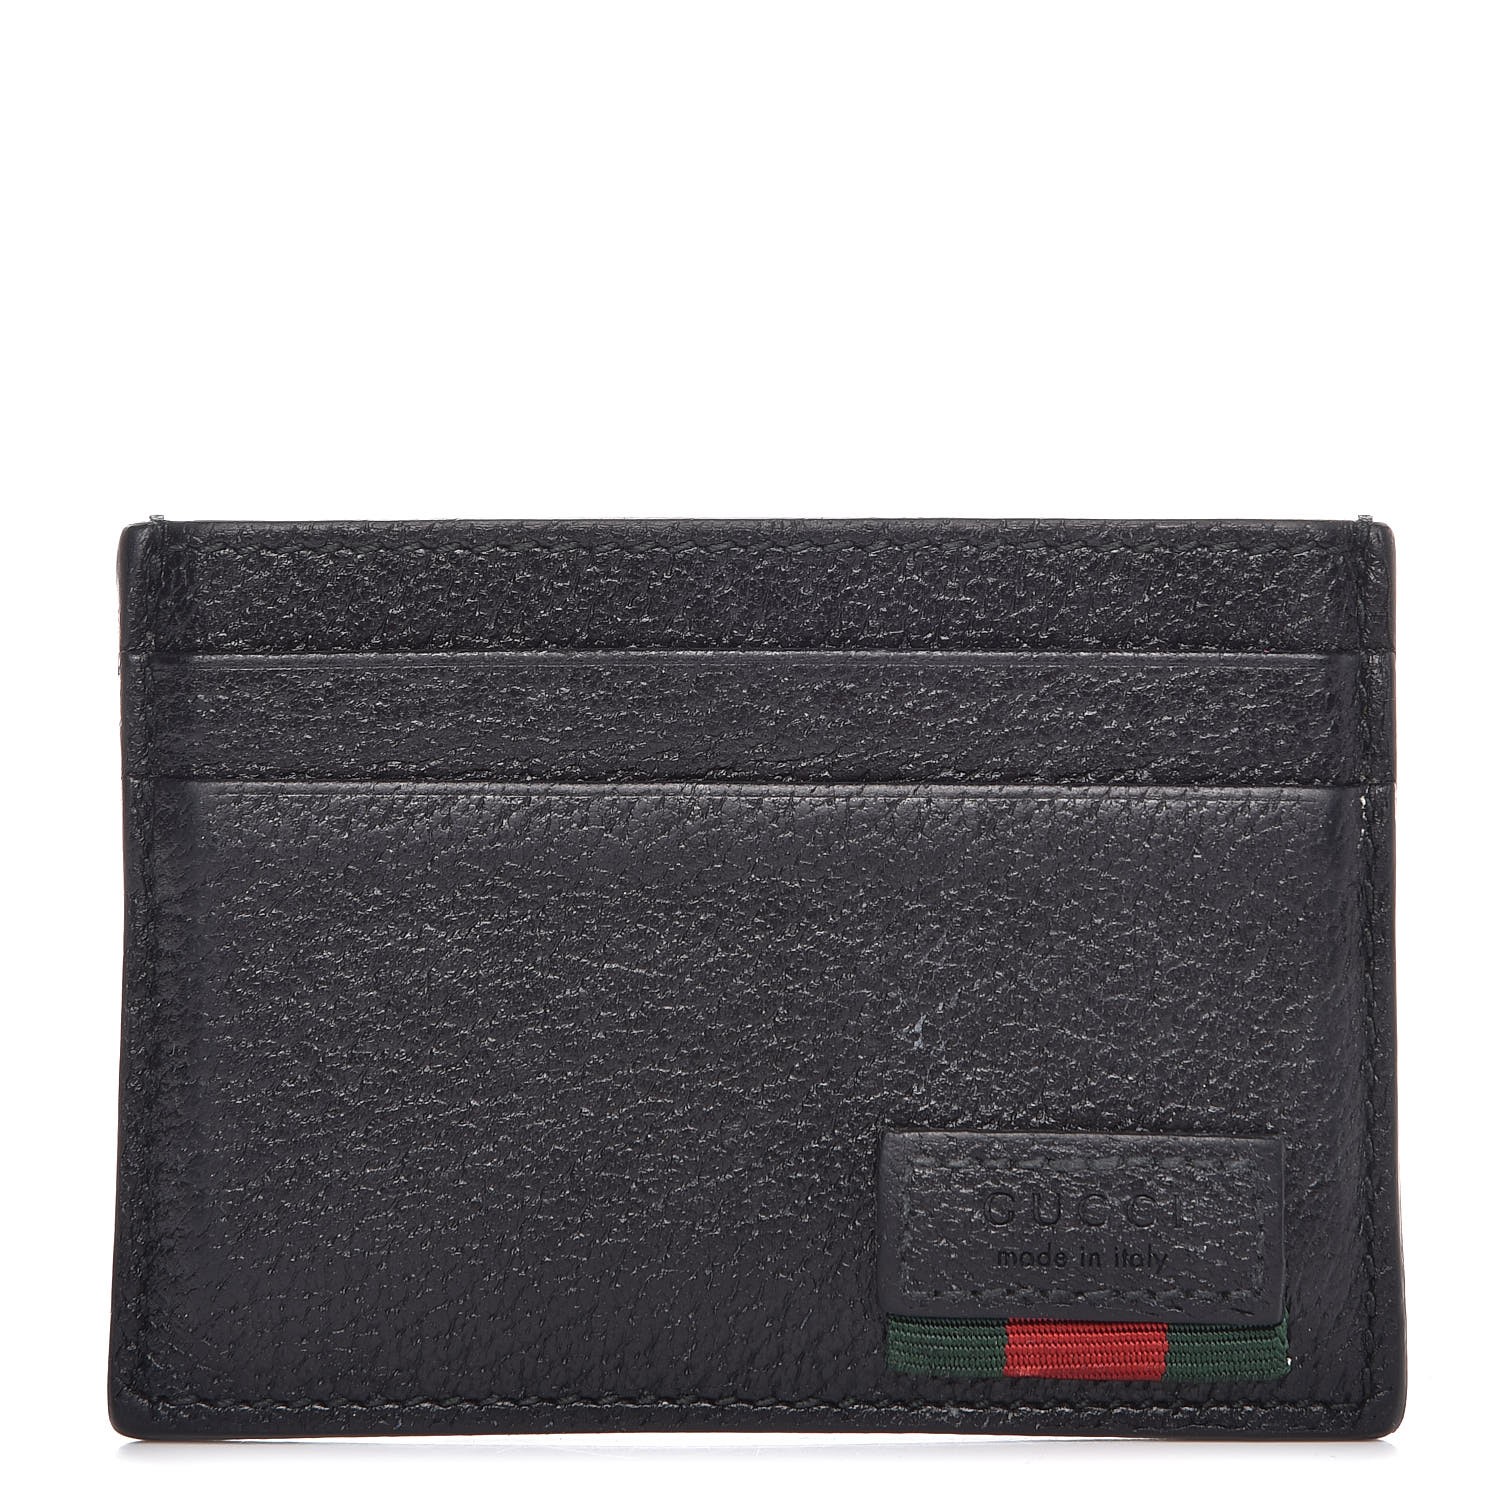 gucci leather money clip with web